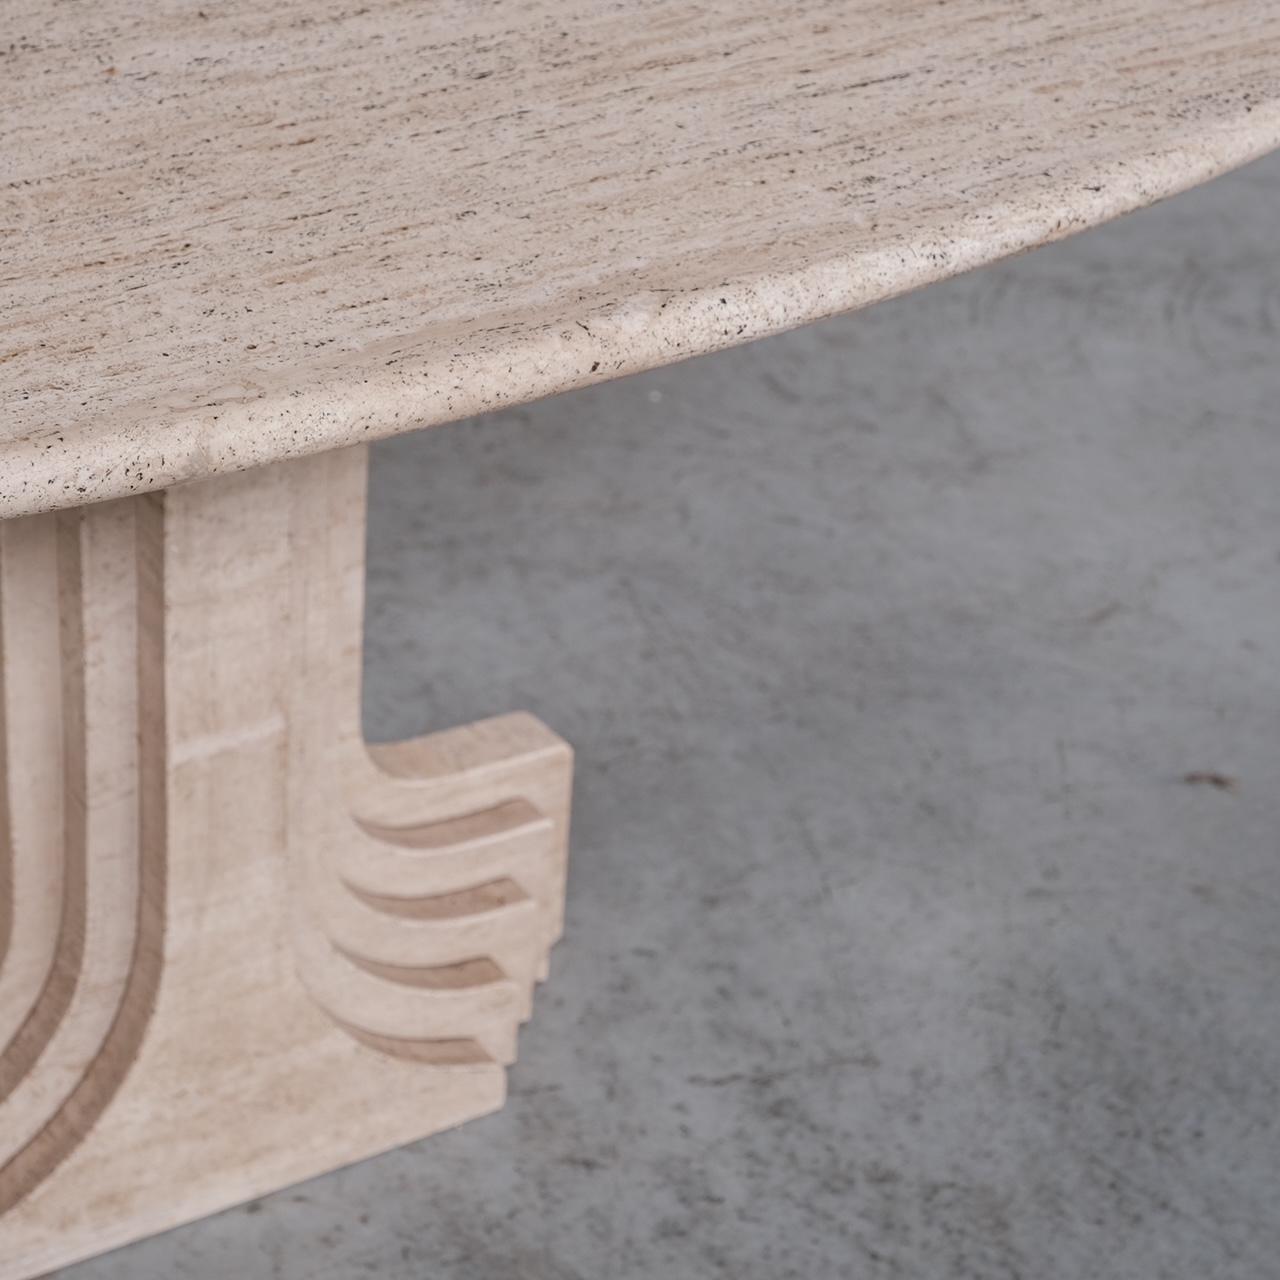 A travertine dining table. 

Attributed to Carlo Scarpa as the 'Argo' table. 

Italy, c1975. 

With heavy architectural influence. All in solid travertine. 

Generally good condition, one small chip to the base, wear commensurate with age.